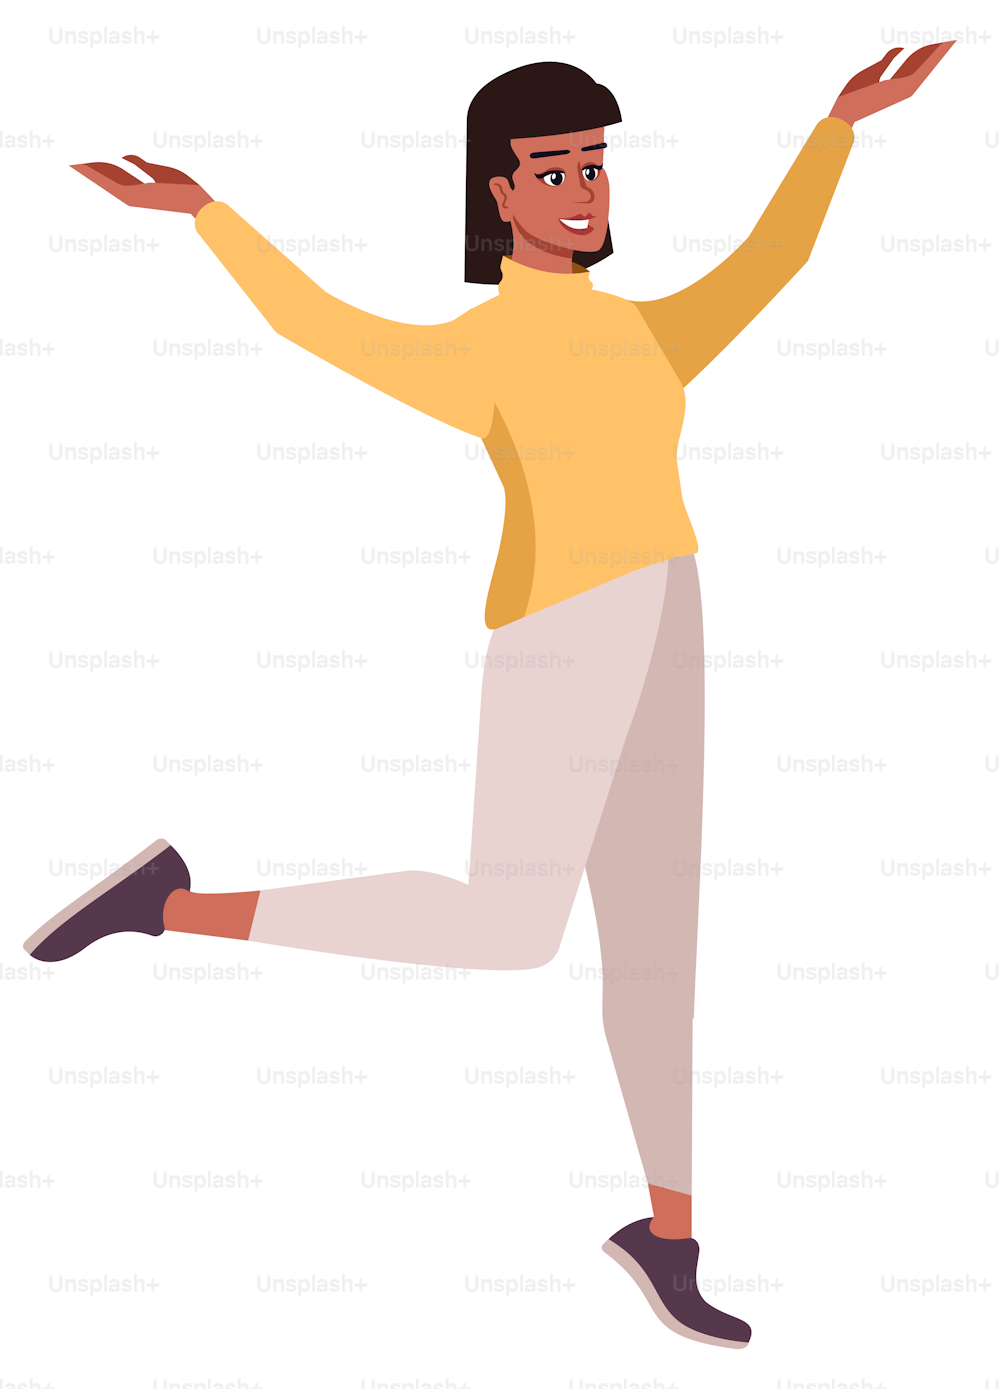 Smiling lady semi flat RGB color vector illustration. Stylish woman standing in joy pose isolated cartoon character on white background